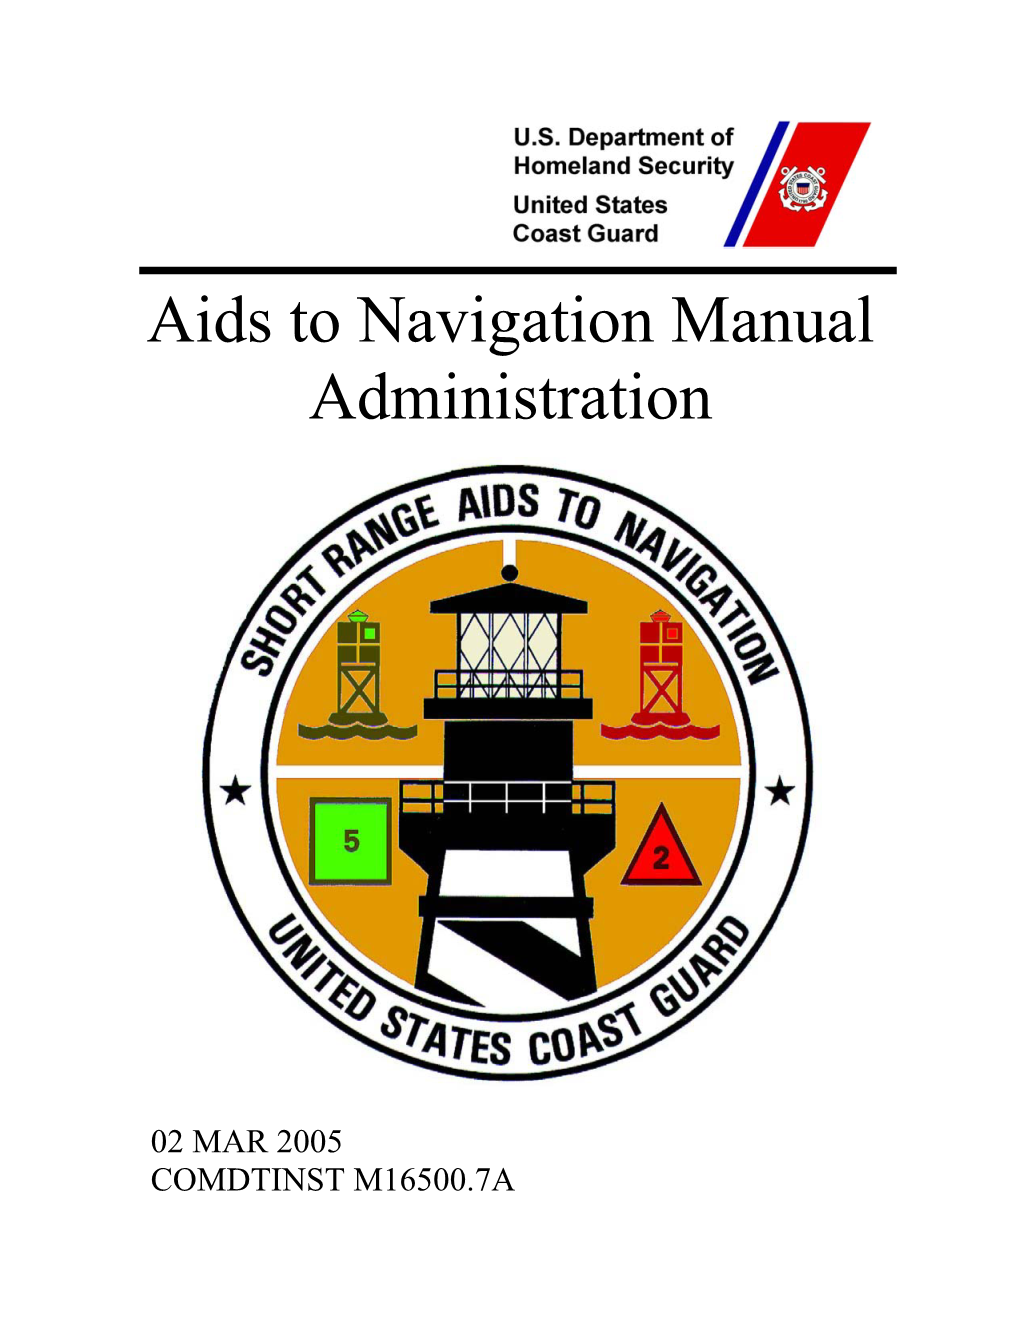 Aids to Navigation Manual – Administration, COMDTINST M16500.7A